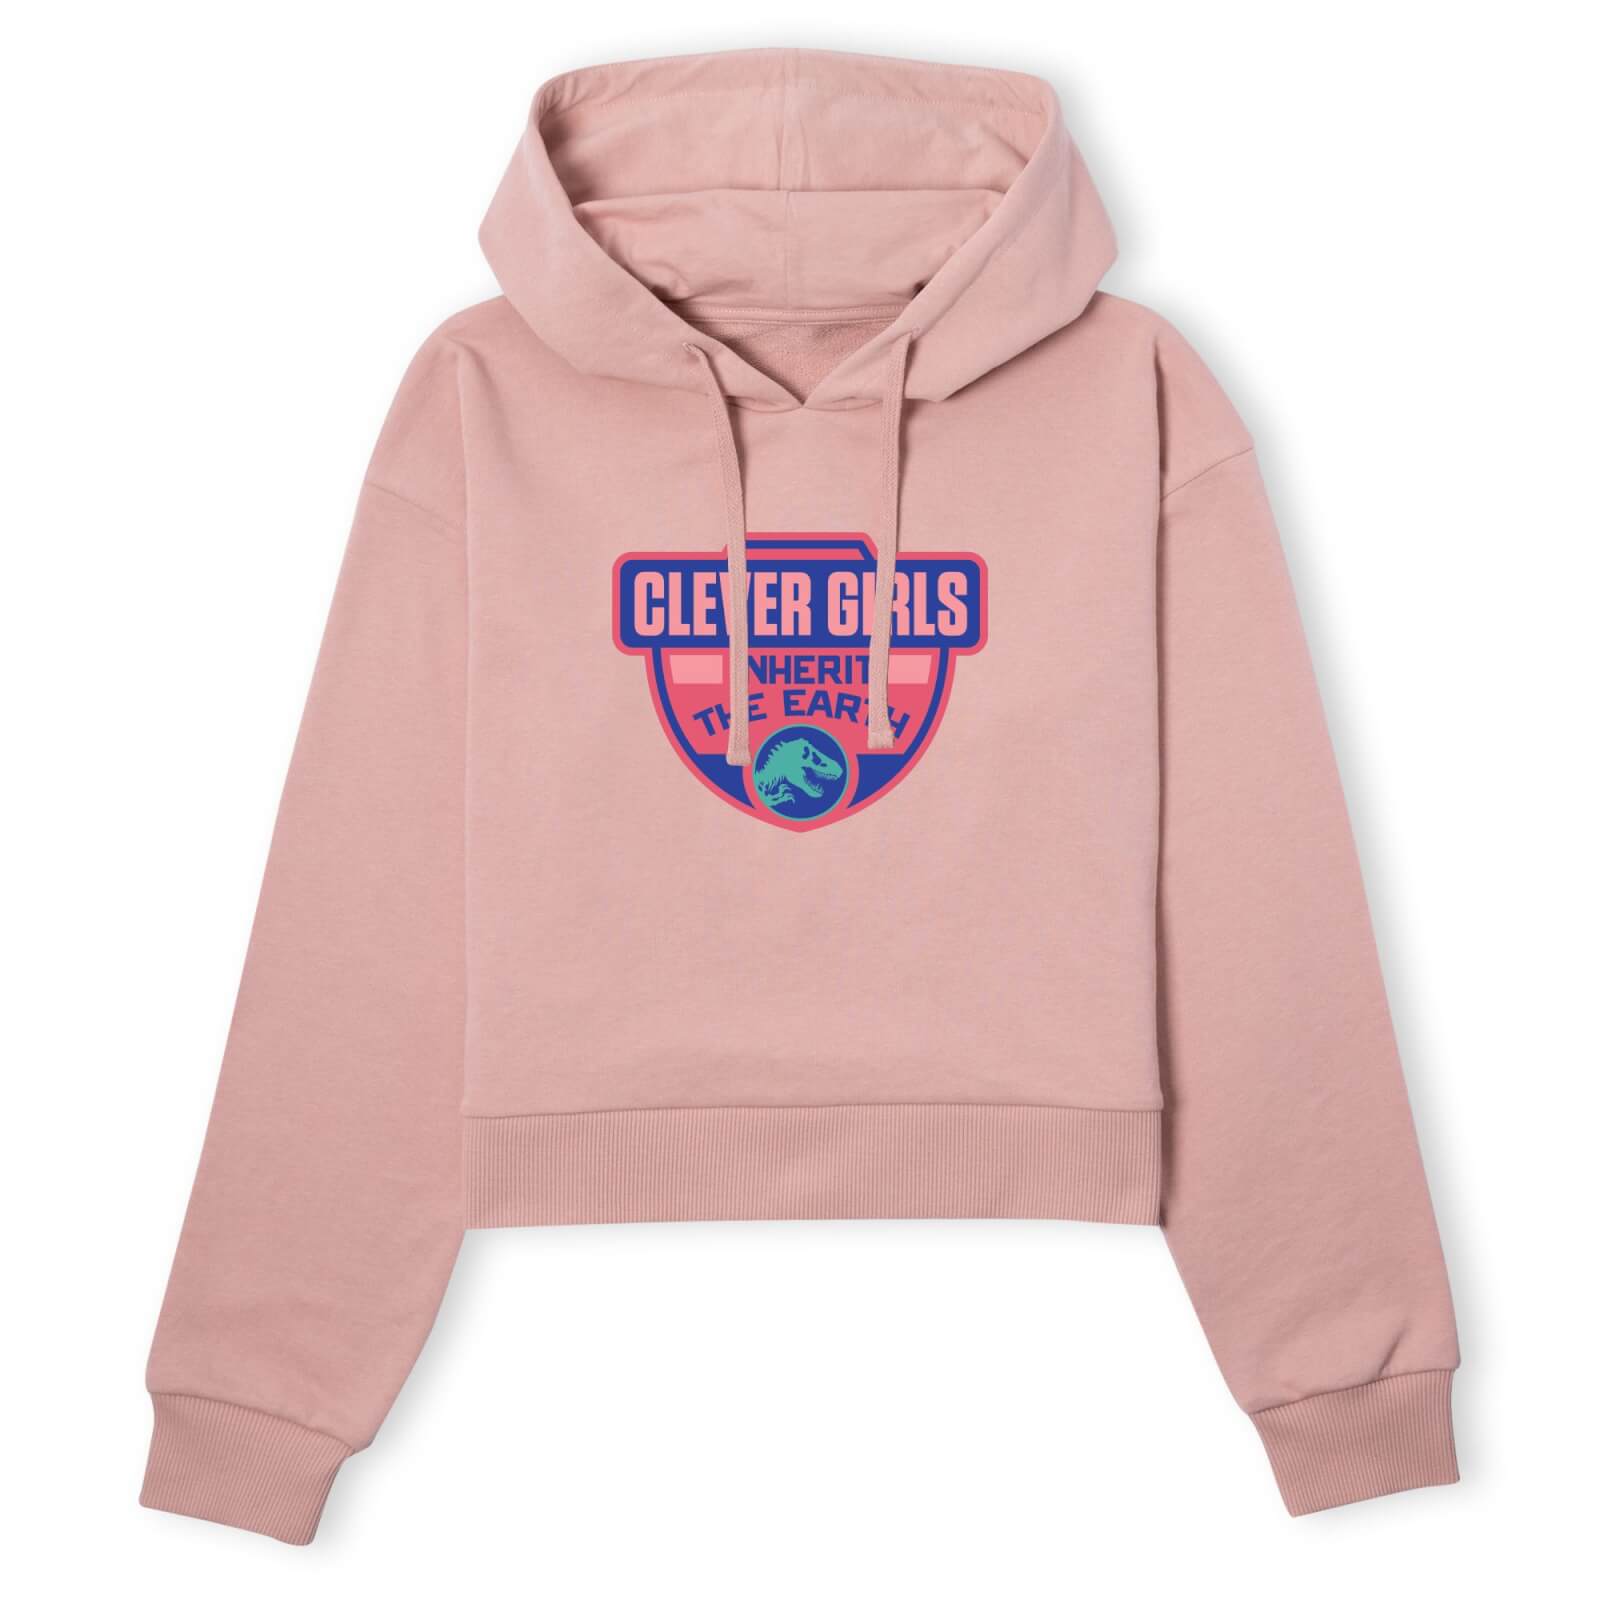 Jurassic Park Clever Girls Inherit The Earth Women's Cropped Hoodie - Dusty Pink - XS - Dusty pink